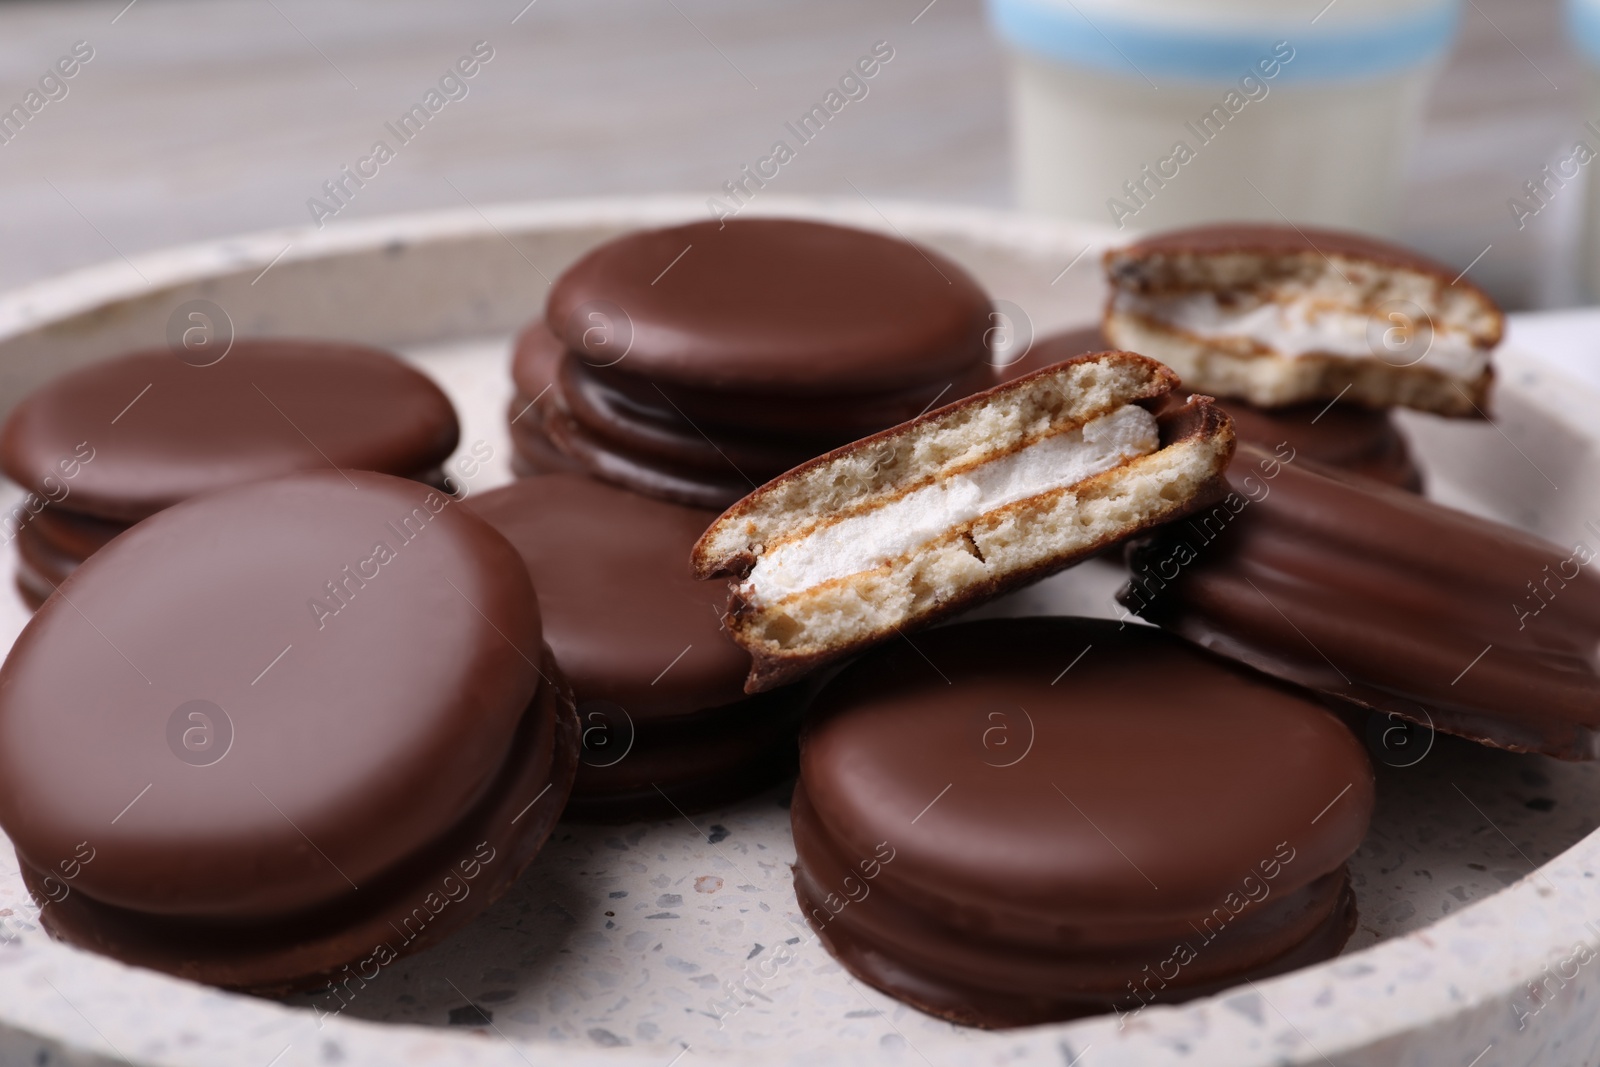 Photo of Tasty choco pies in plate, closeup view